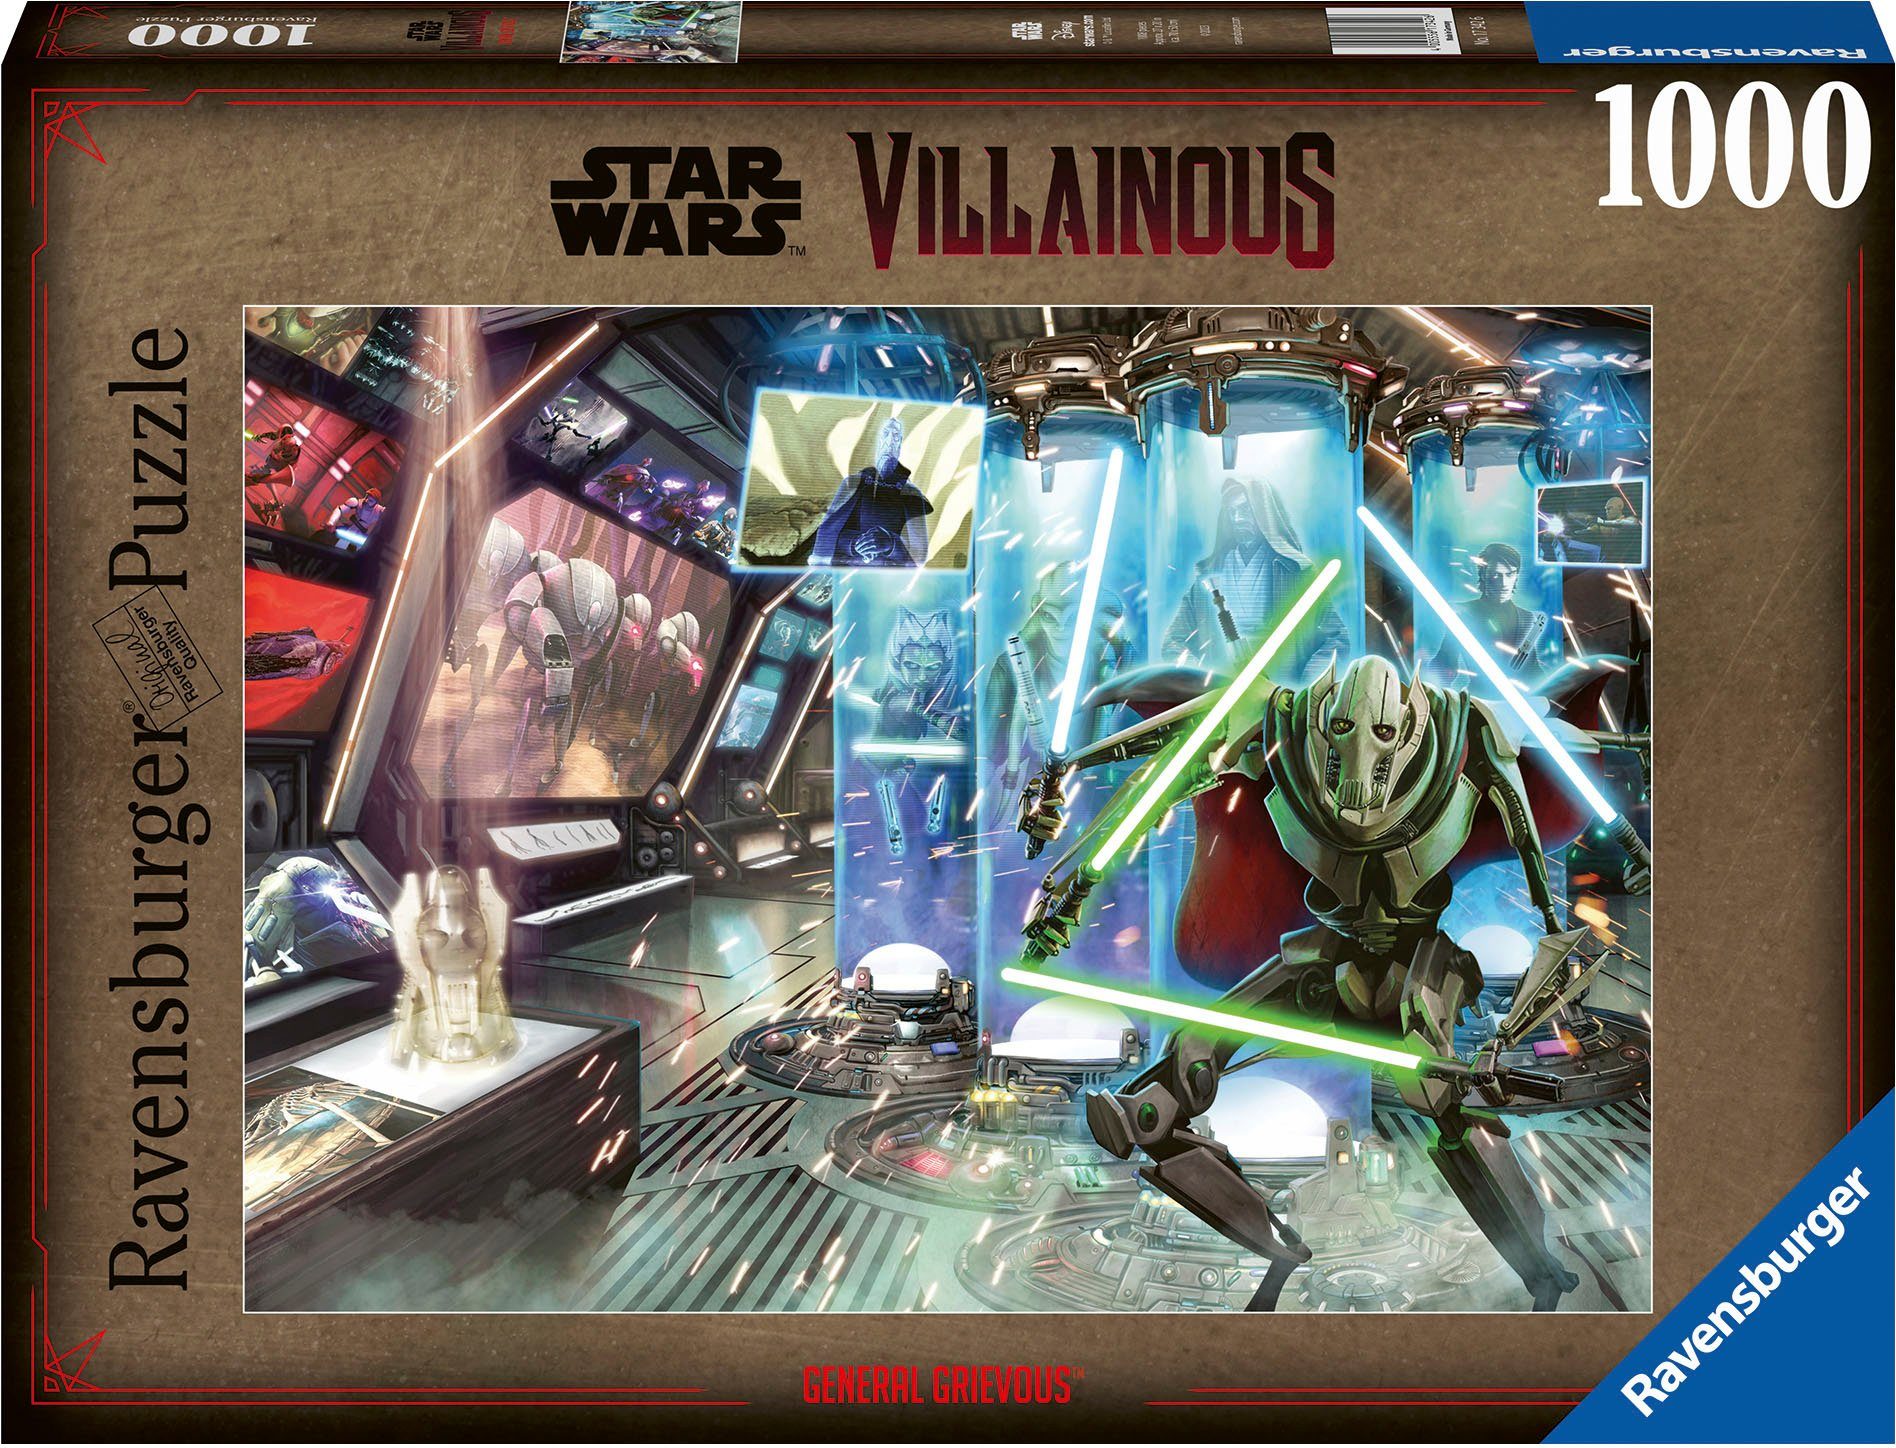 Ravensburger Puzzle Star Wars Villainous, General Grievous, 1000 Puzzleteile, Made in Germany